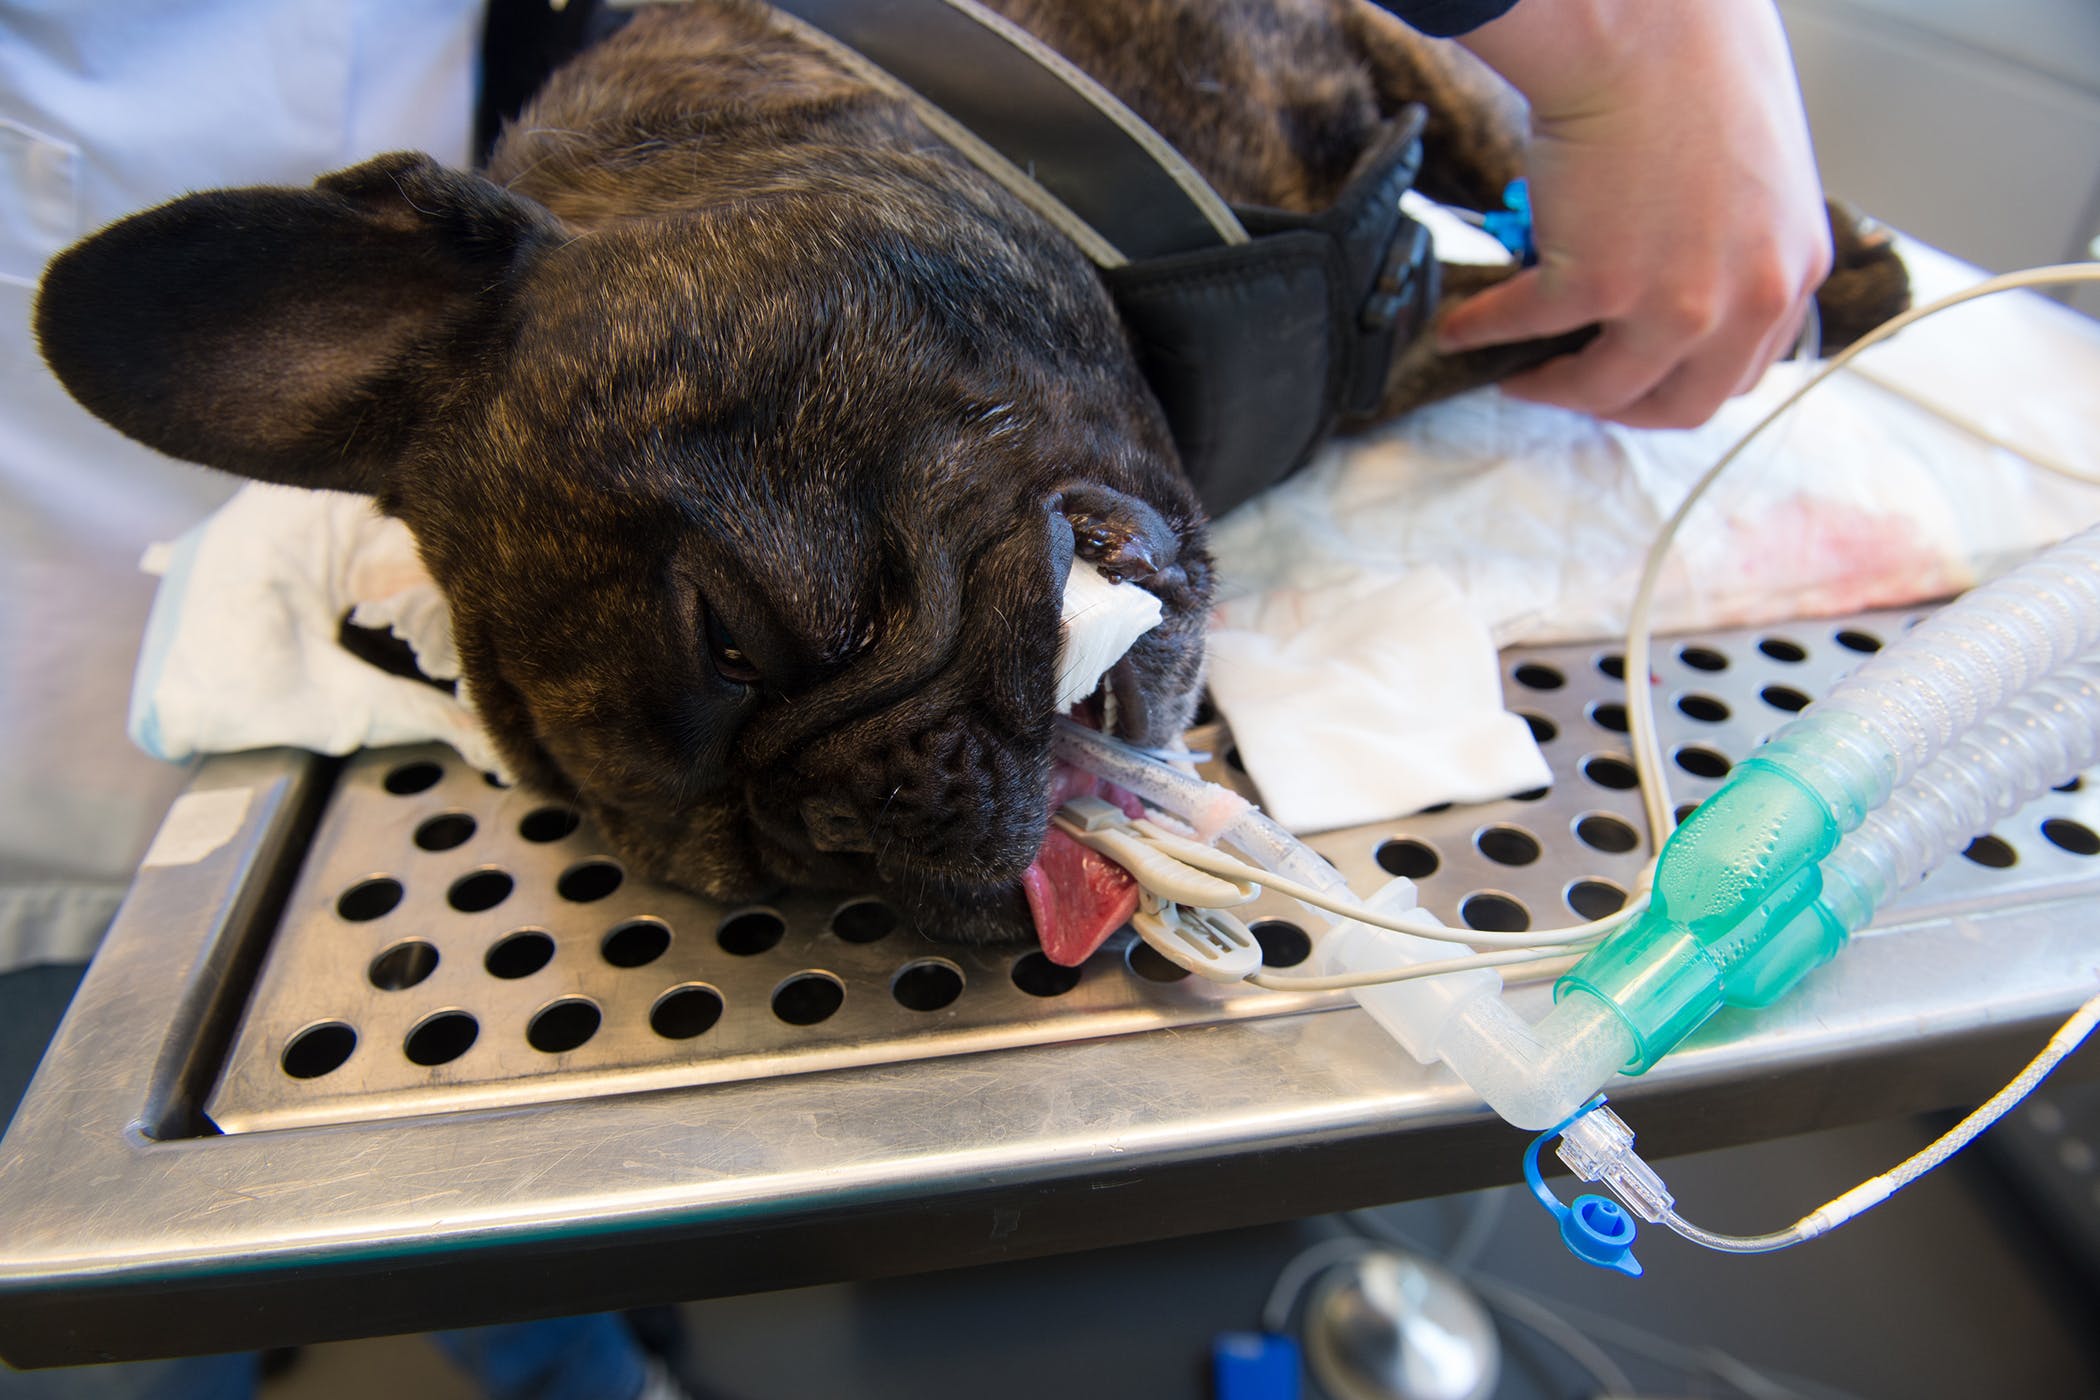 How Much Is Emergency Gastrointestinal Surgery For Dogs?